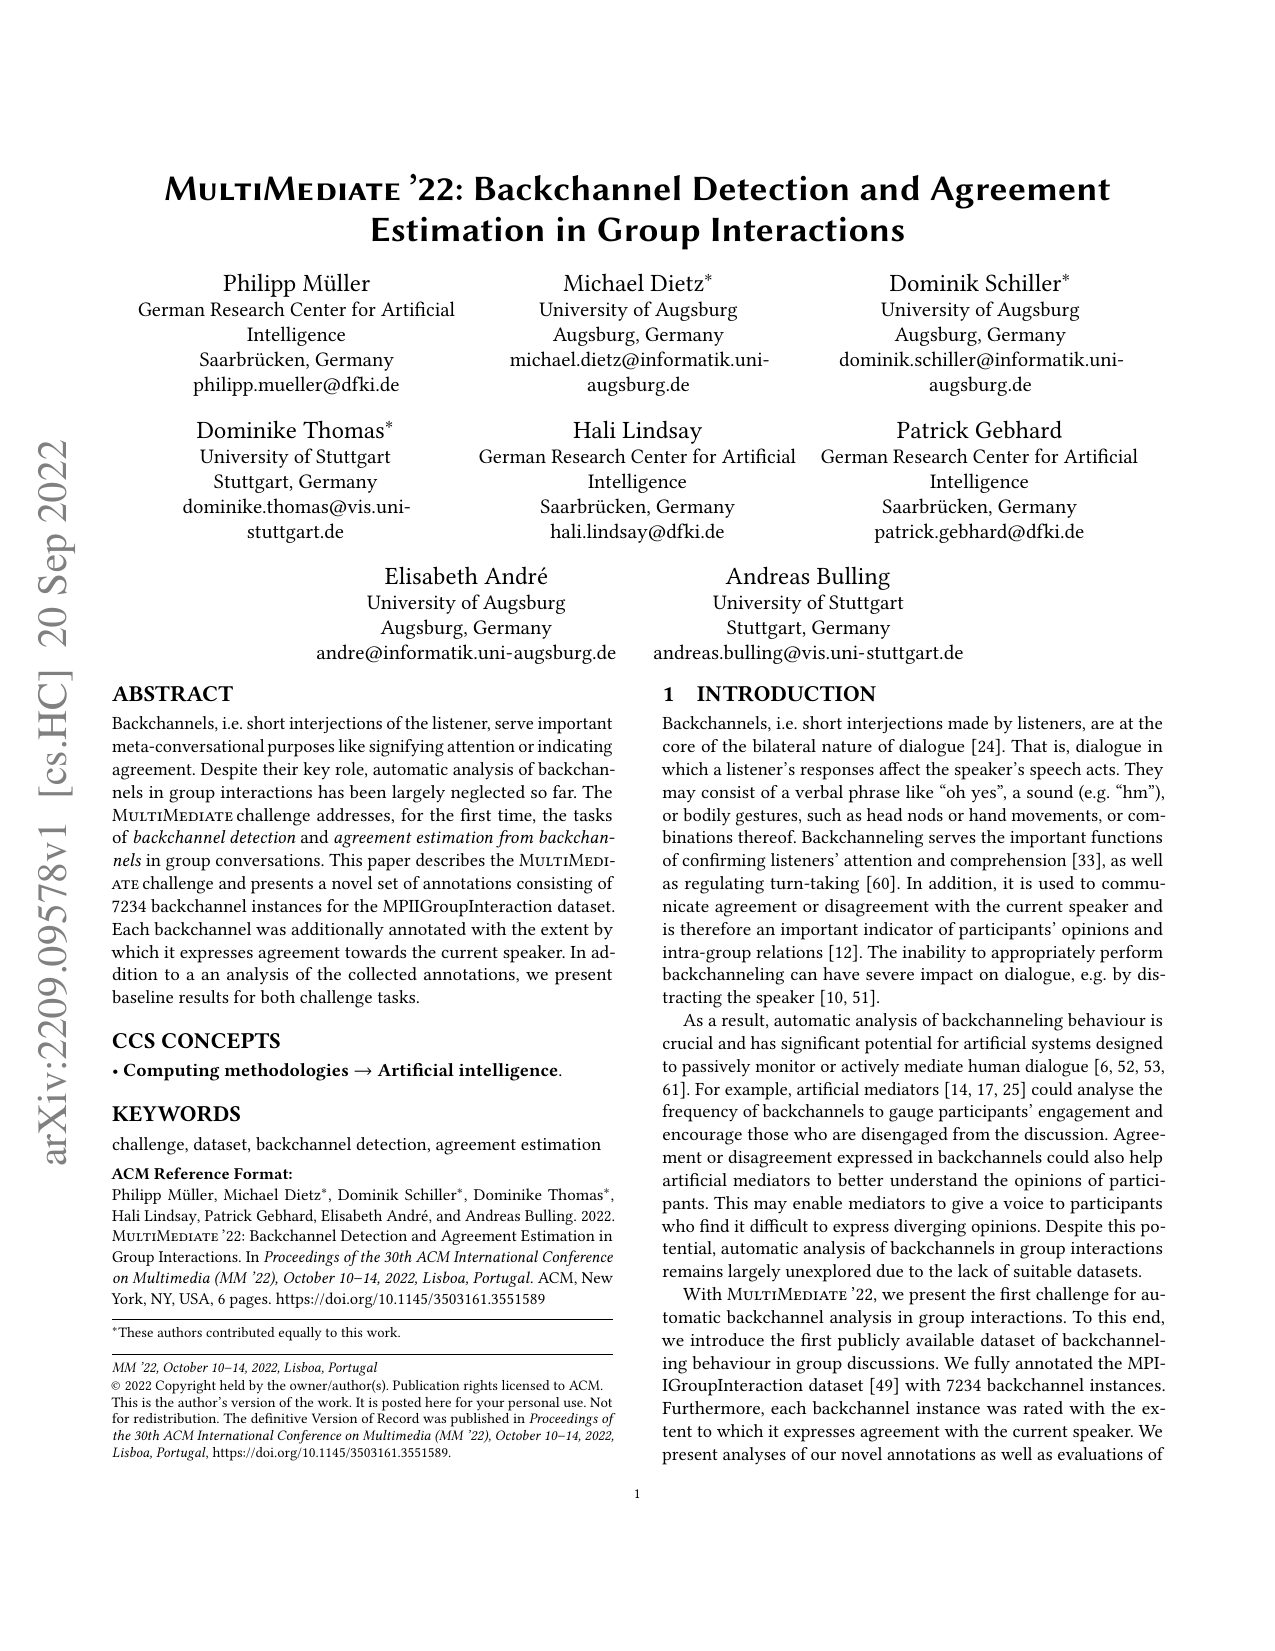 MultiMediate’22: Backchannel Detection and Agreement Estimation in Group Interactions